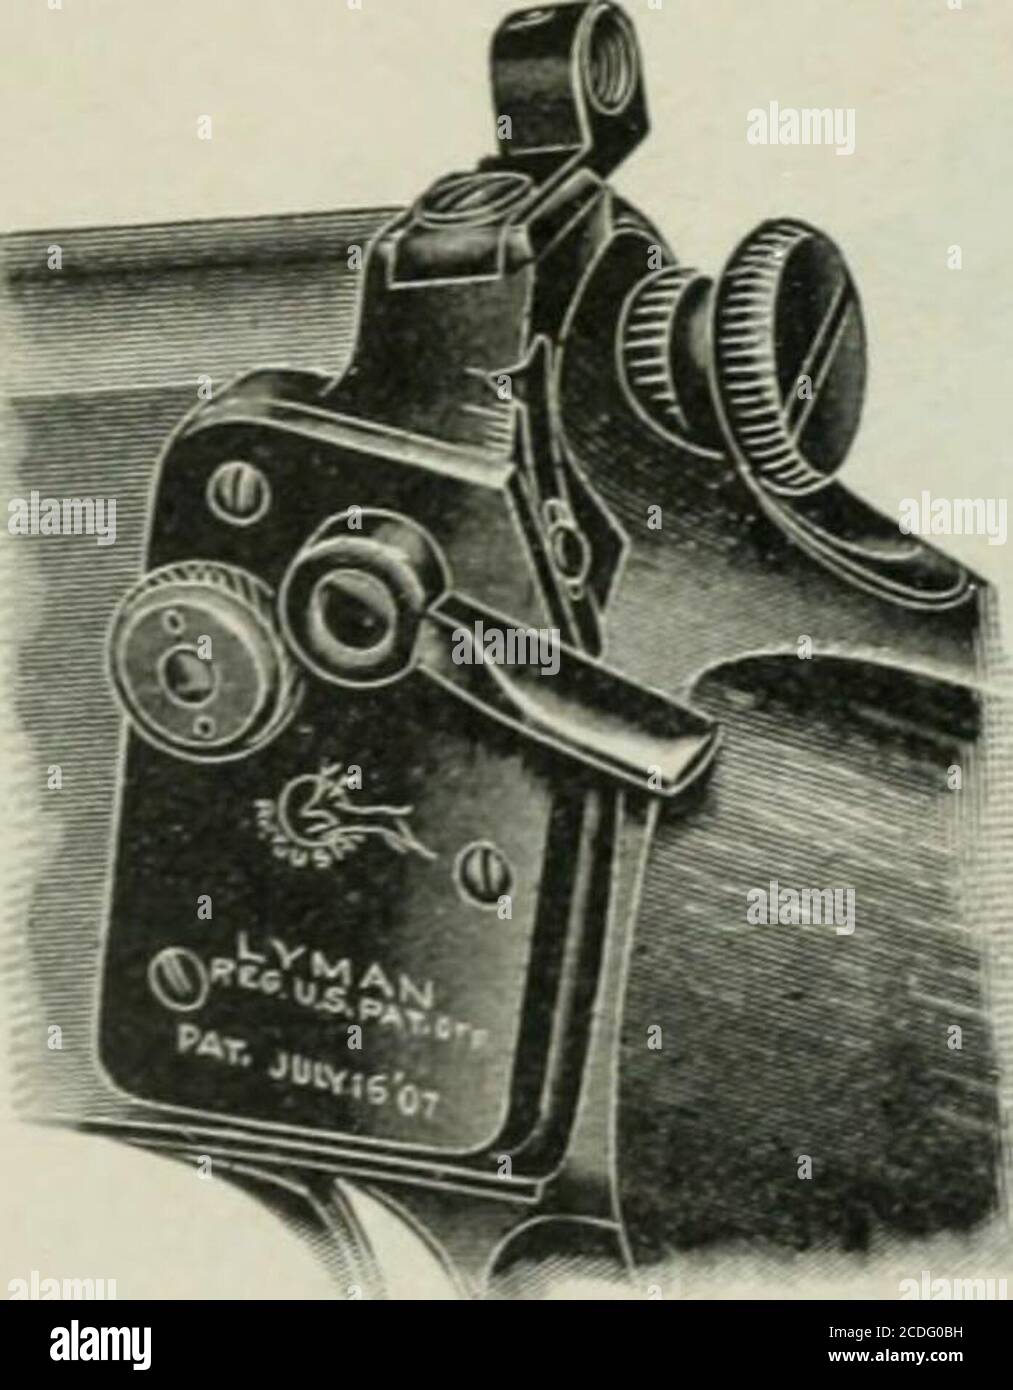 . Rod and gun . LYMAN PATENT RECEIVER SIGHT =- --^ FOR - WINCHESTER AUTOMATIC RIFLE IVfodel 1903. No. 45 Price $3.50With Cup DUc $3.75 Aperture is fitted with peep, and is also tJireadedfor Disc. The graduated scale on slide and method of elevat-ing permit very close adjustment. Send for catalogue. THE LYMAN GUN SIGHT C0RP0R4TI0N Middlefield, Ct., U. S. A. I M.R.M. SHOT Helpsgood shooting Take precautions and specifyfor this brand with over 30years reputation for beinguniform, round and true to size. THE Montreal Rolling Mills Co. MONTREAL 1253 ROD AND GUX IX CANADA The fonowinj are the scores Stock Photo